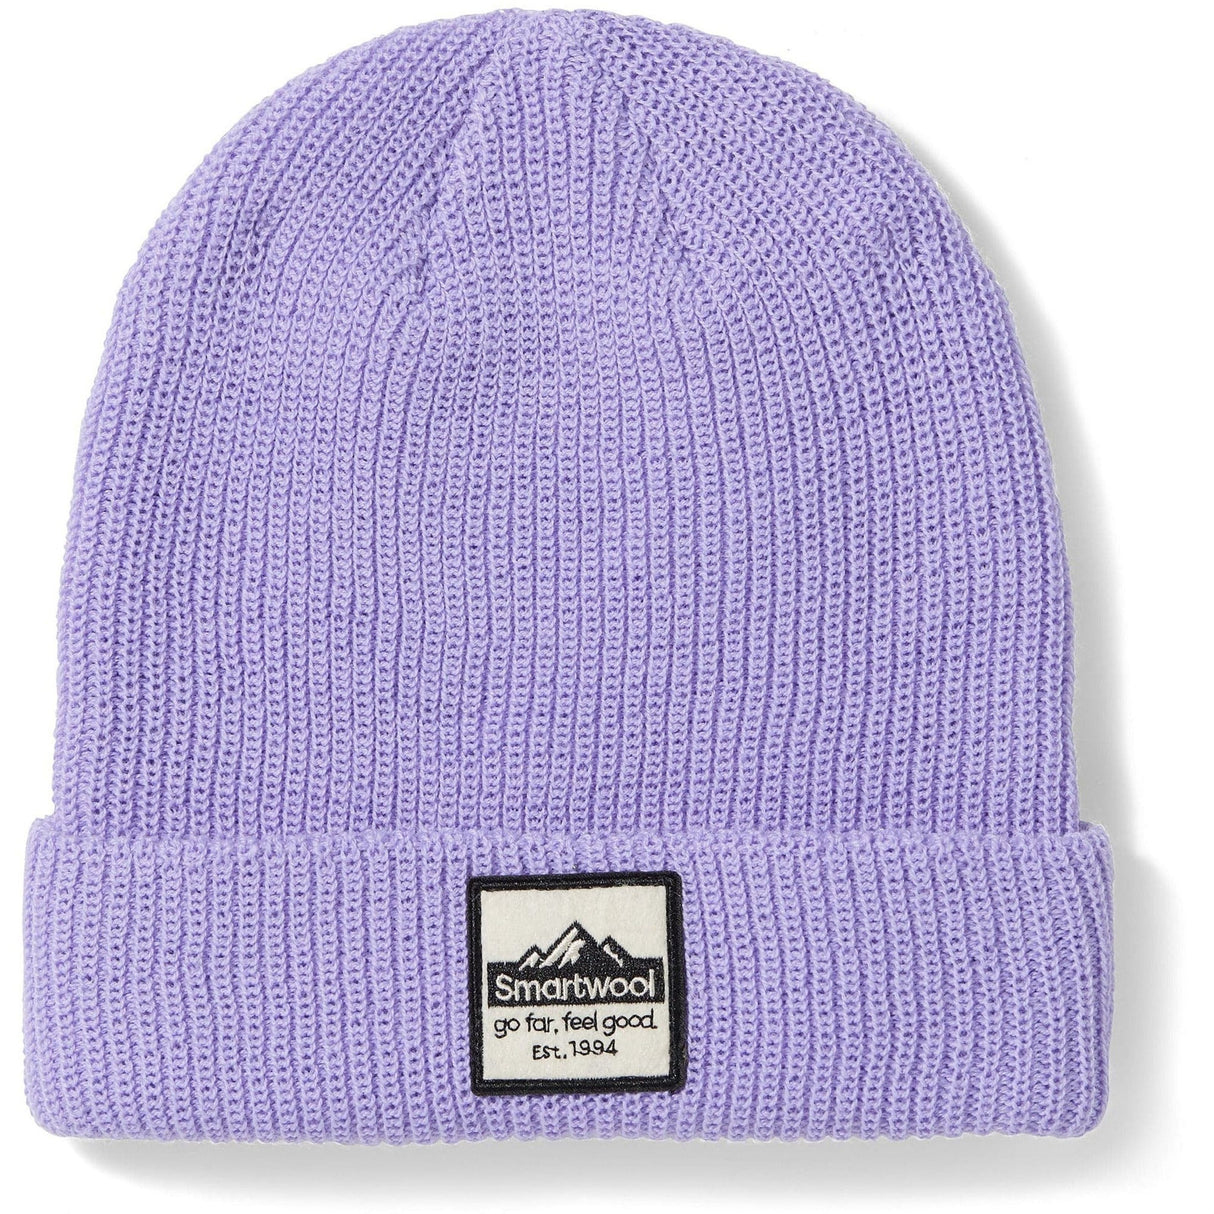 Smartwool Patch Beanie  -  One Size Fits Most / Ultra Violet